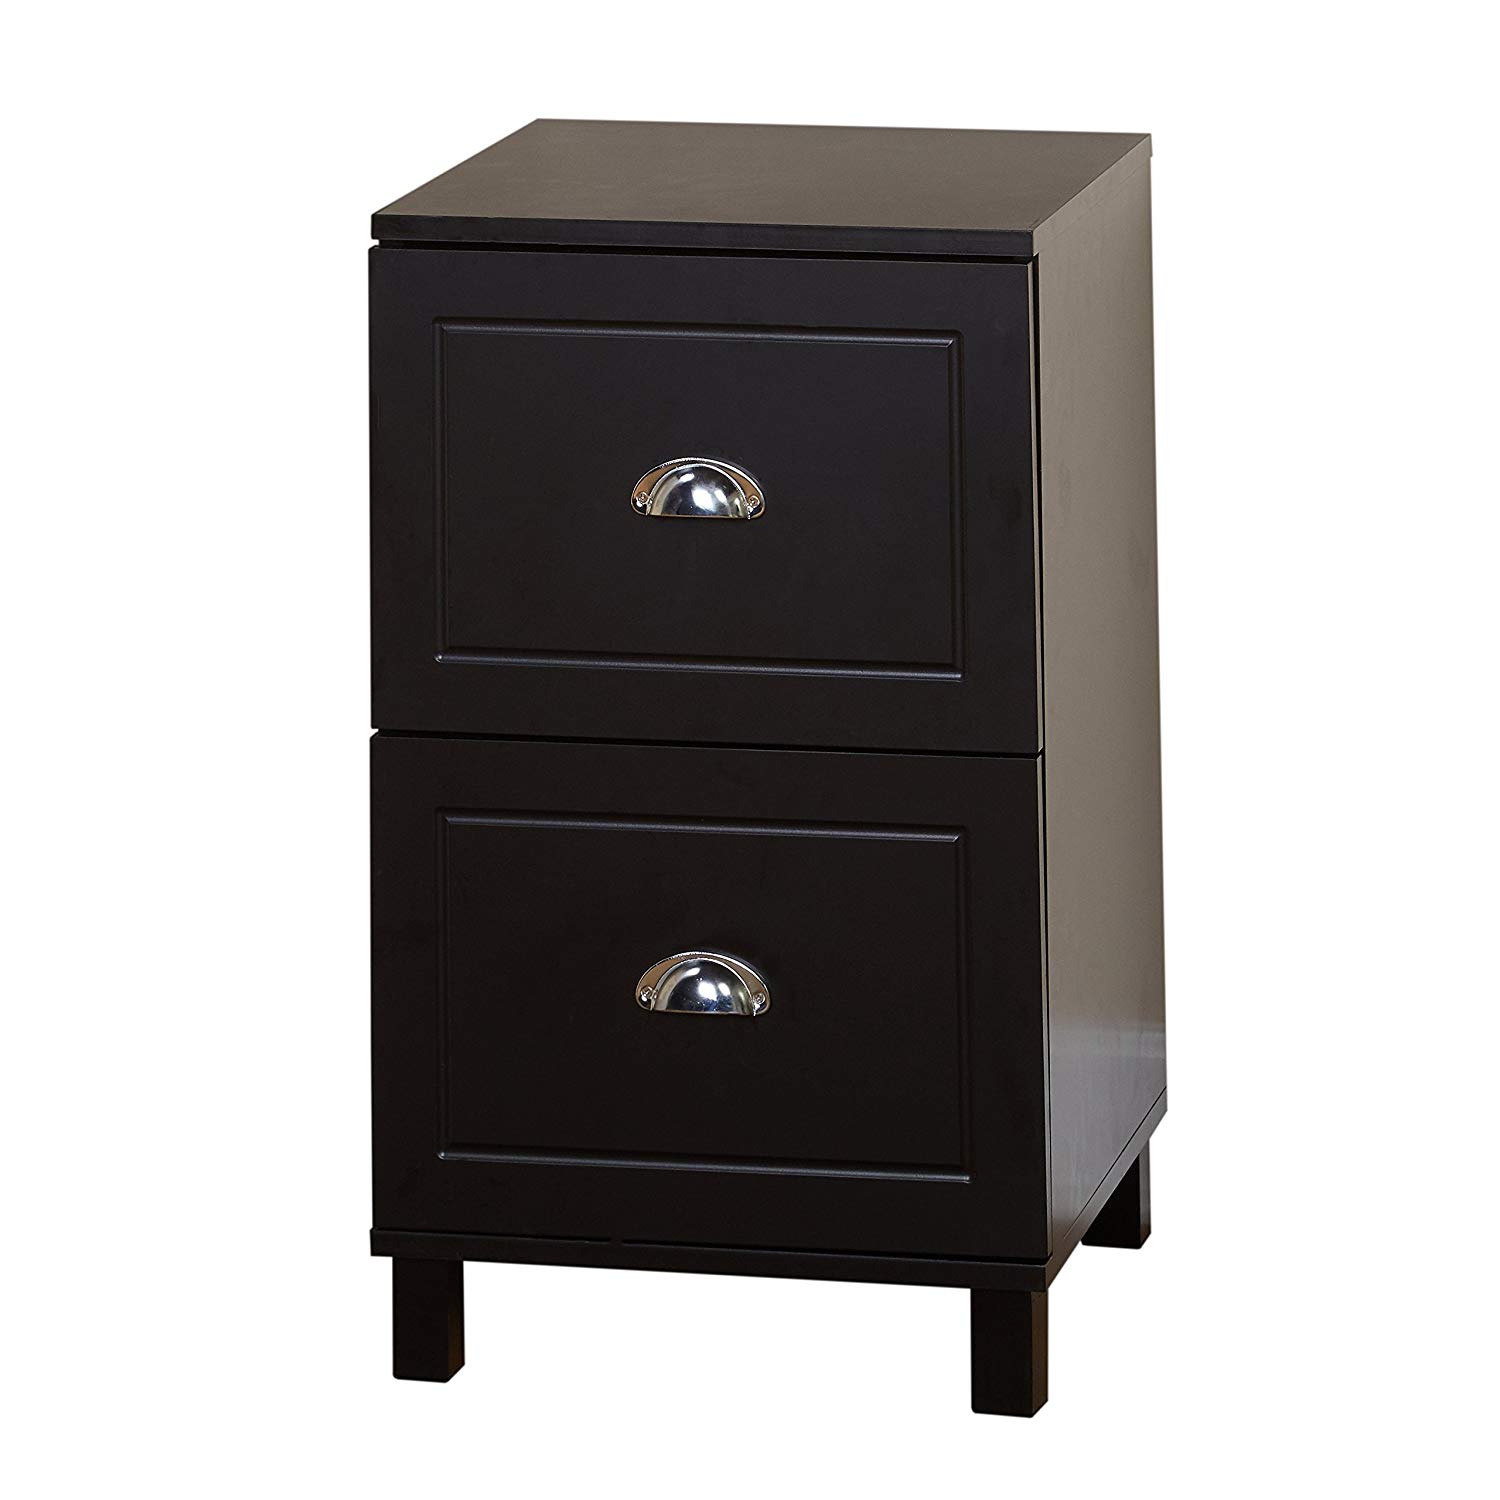 target marketing systems bradley collection modern accent table with drawer filing cabinet metal handles black kitchen dining corner room furniture living pool patio umbrellas